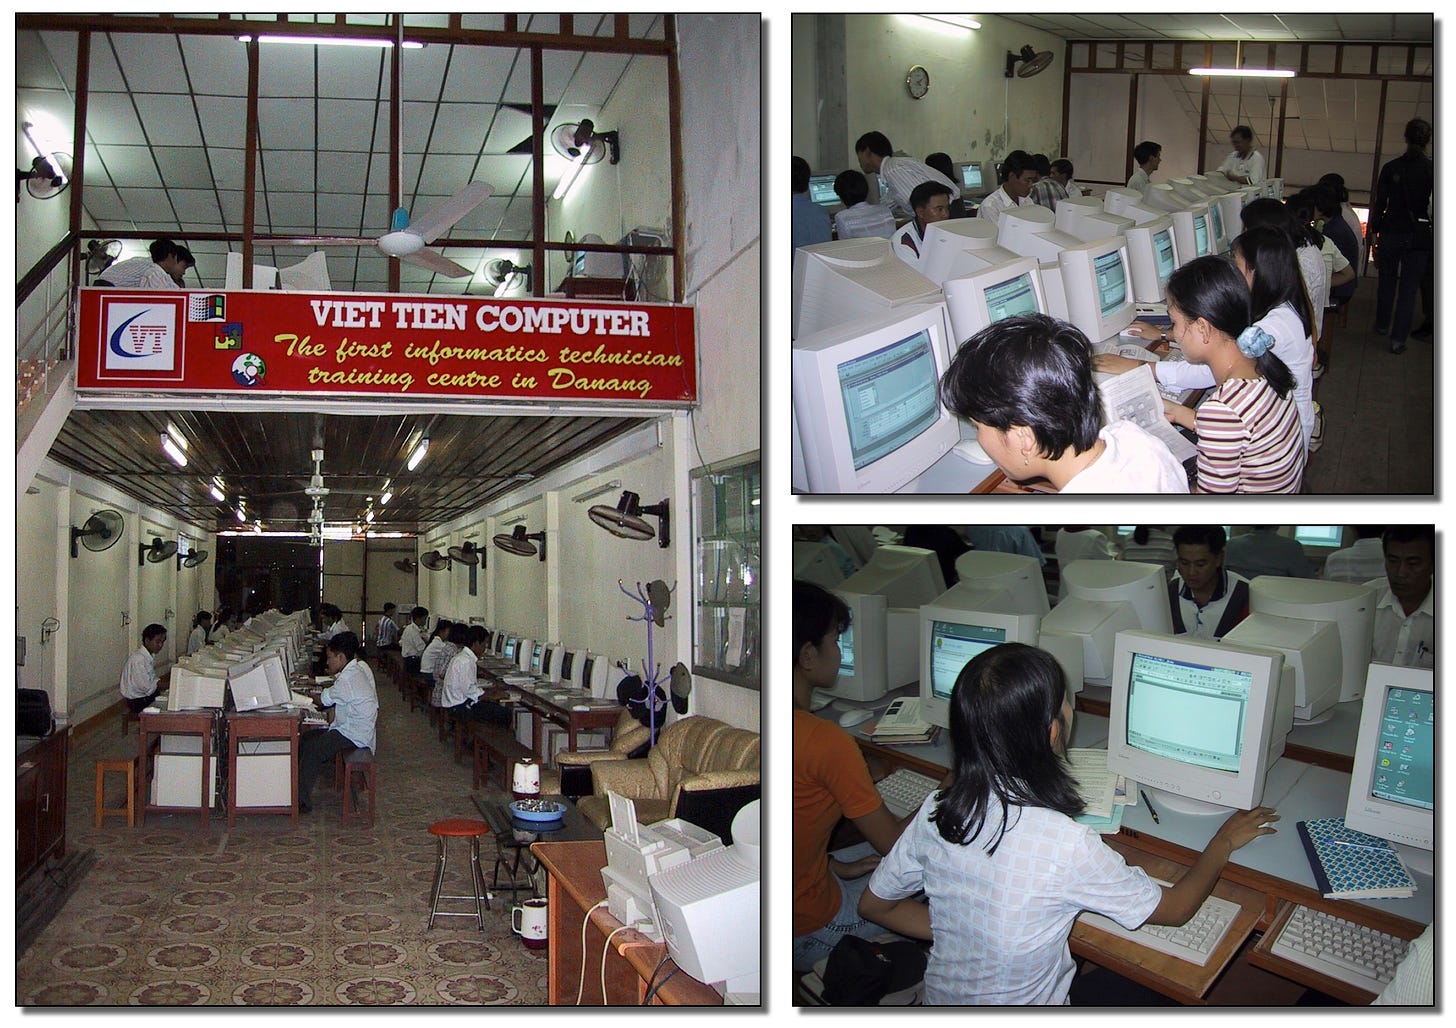 Three photos. 1) Overview shot of the VIET TIEN COMPUTER "the first informatics technician training centre in Danang" 2) several students at desktop PCs learning Microsoft Access database 3) Students at PCs using Word.